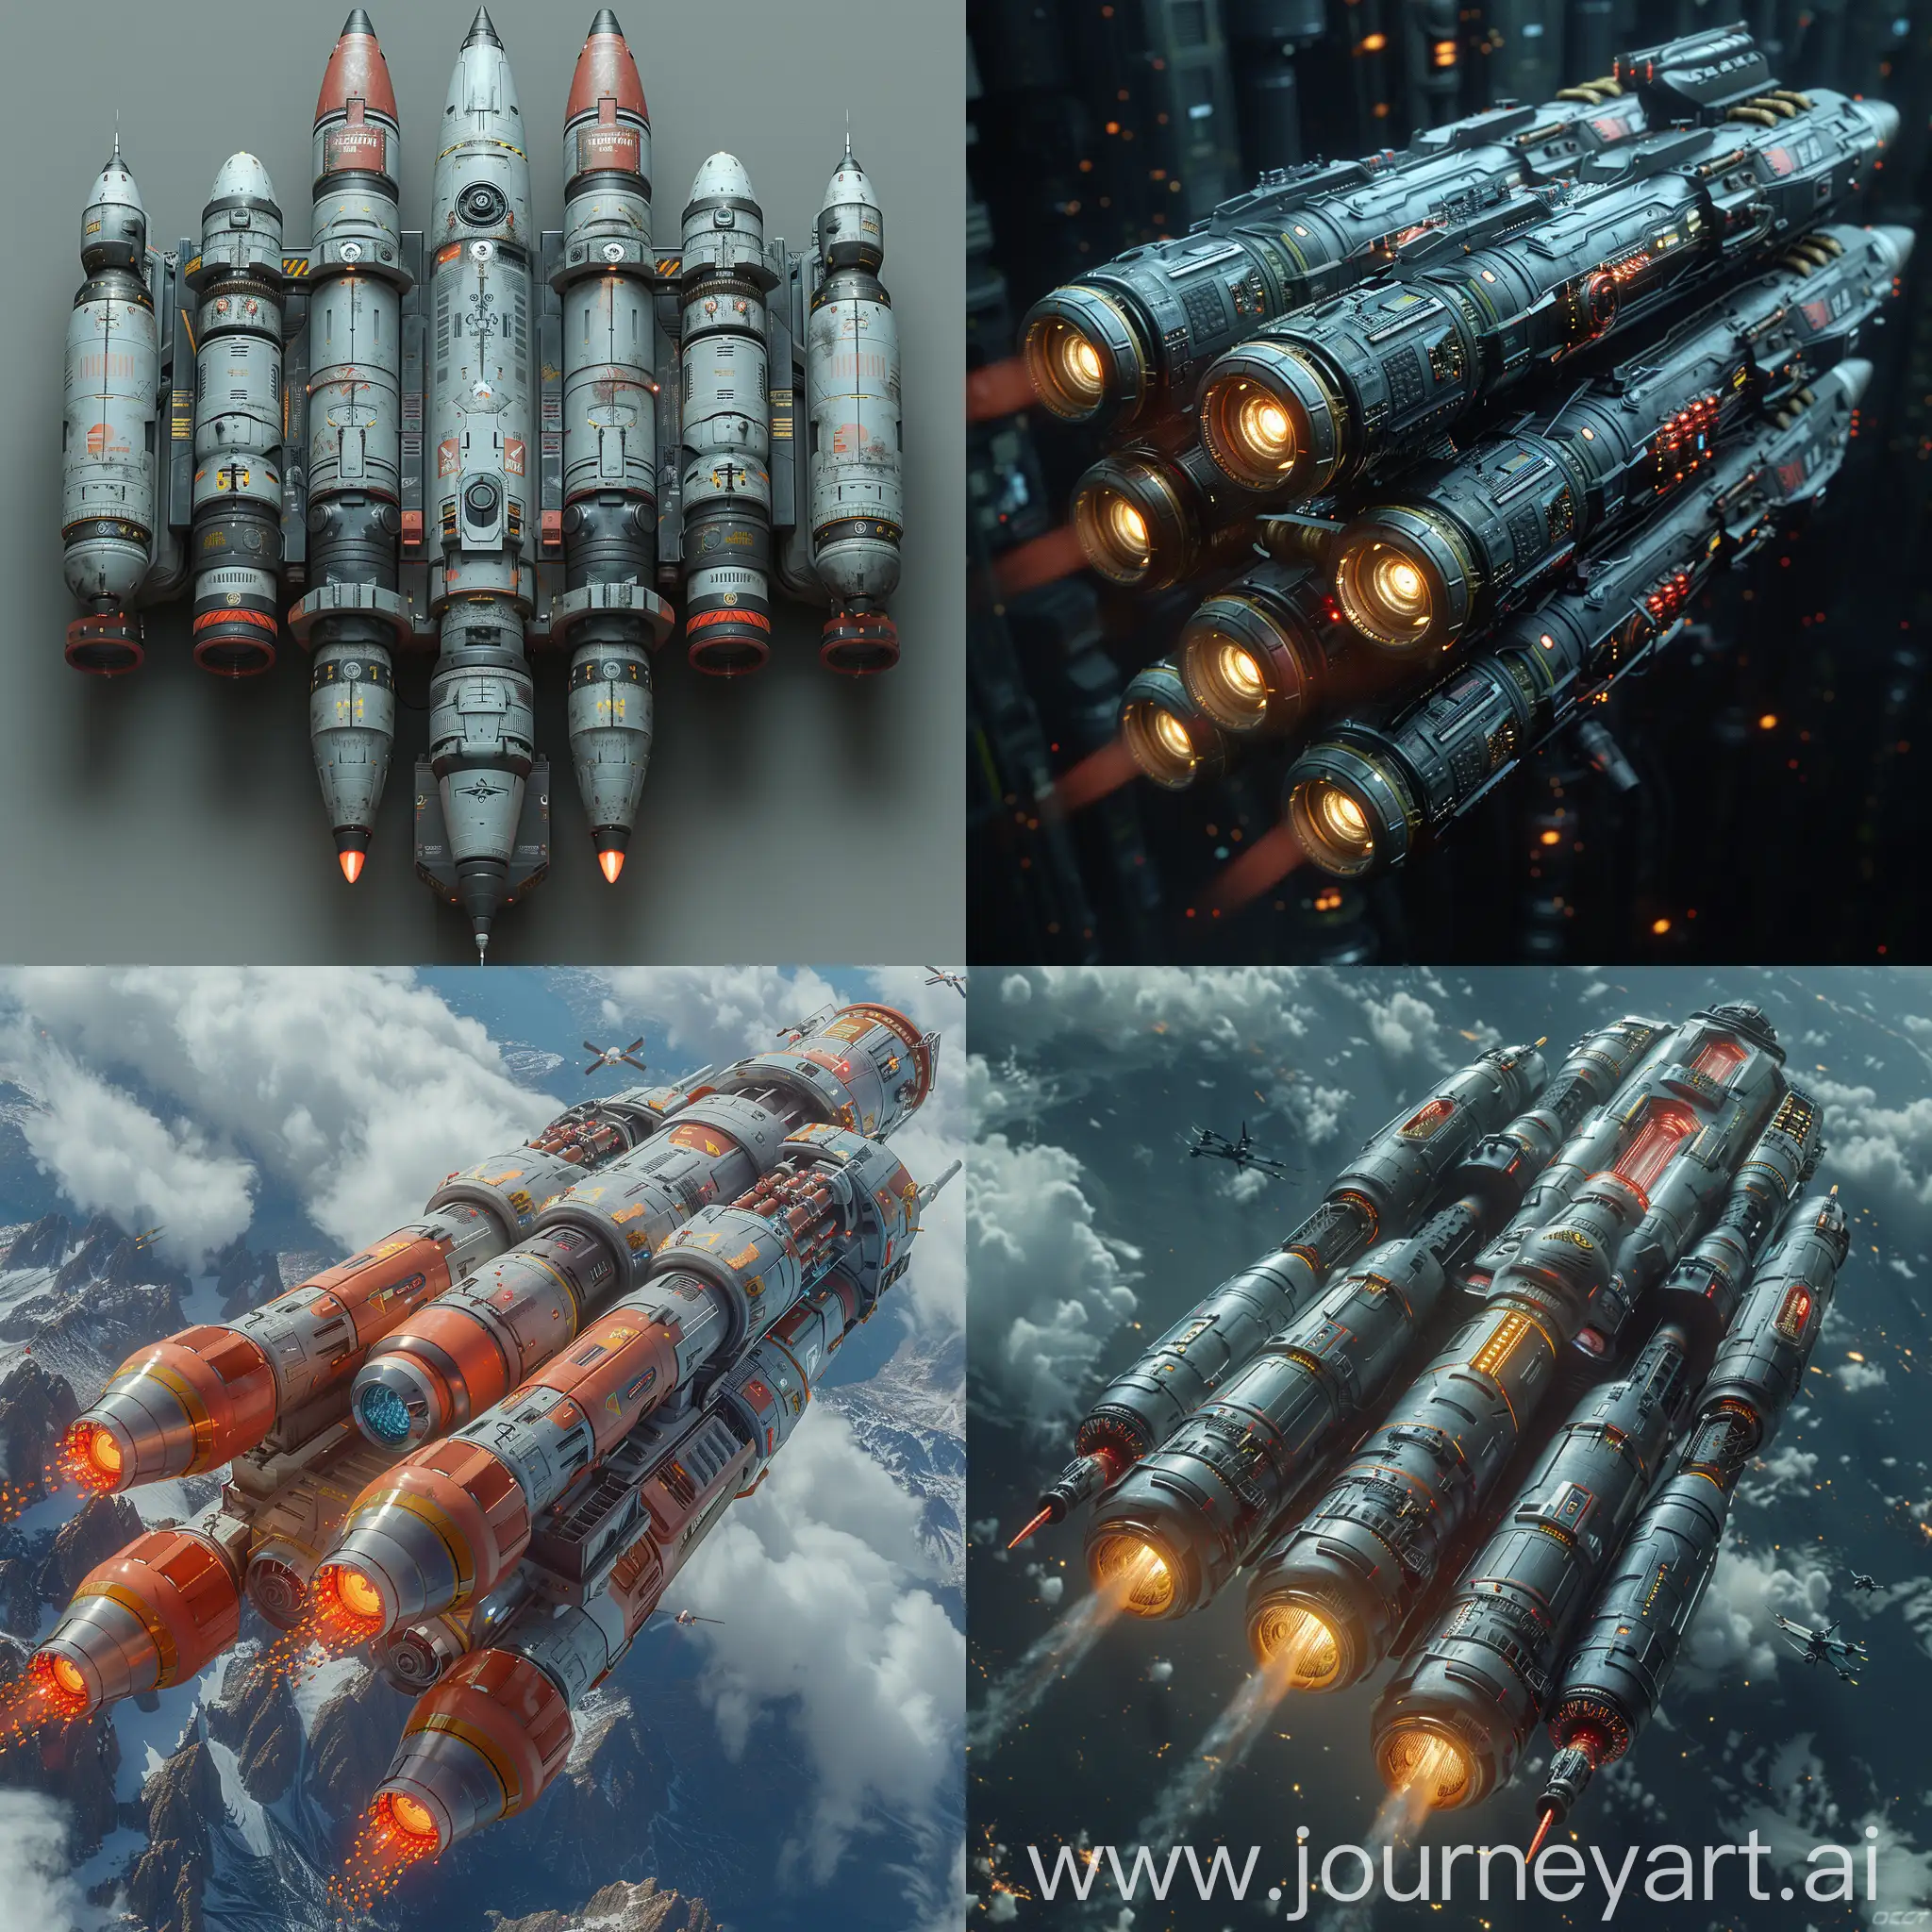 Futuristic multiple missile launcher (weapon), Automated Targeting System, Stealth Mode, Swarm Technology, Long-Range Precision, Modular Design, Self-Healing Technology, Electromagnetic Railgun, Holographic User Interface, Energy Shield, Drone Integration, Solar-Powered, Recyclable Materials, Minimal Emissions, Biodegradable Payloads, Efficient Energy Consumption, Water-Based Cooling System, Regenerative Braking, Carbon Offset Program, Smart Power Management, Eco-Friendly Disposal, Reinforced Armor Plating, Shock Absorption System, Blast-Resistant Design, Vibration Dampening Technology, Ballistic Protection, Emergency Shutdown Mechanism, Redundant Systems, Ruggedized Electronics, Impact-Resistant Coatings, Crush Zones, octane render --stylize 1000